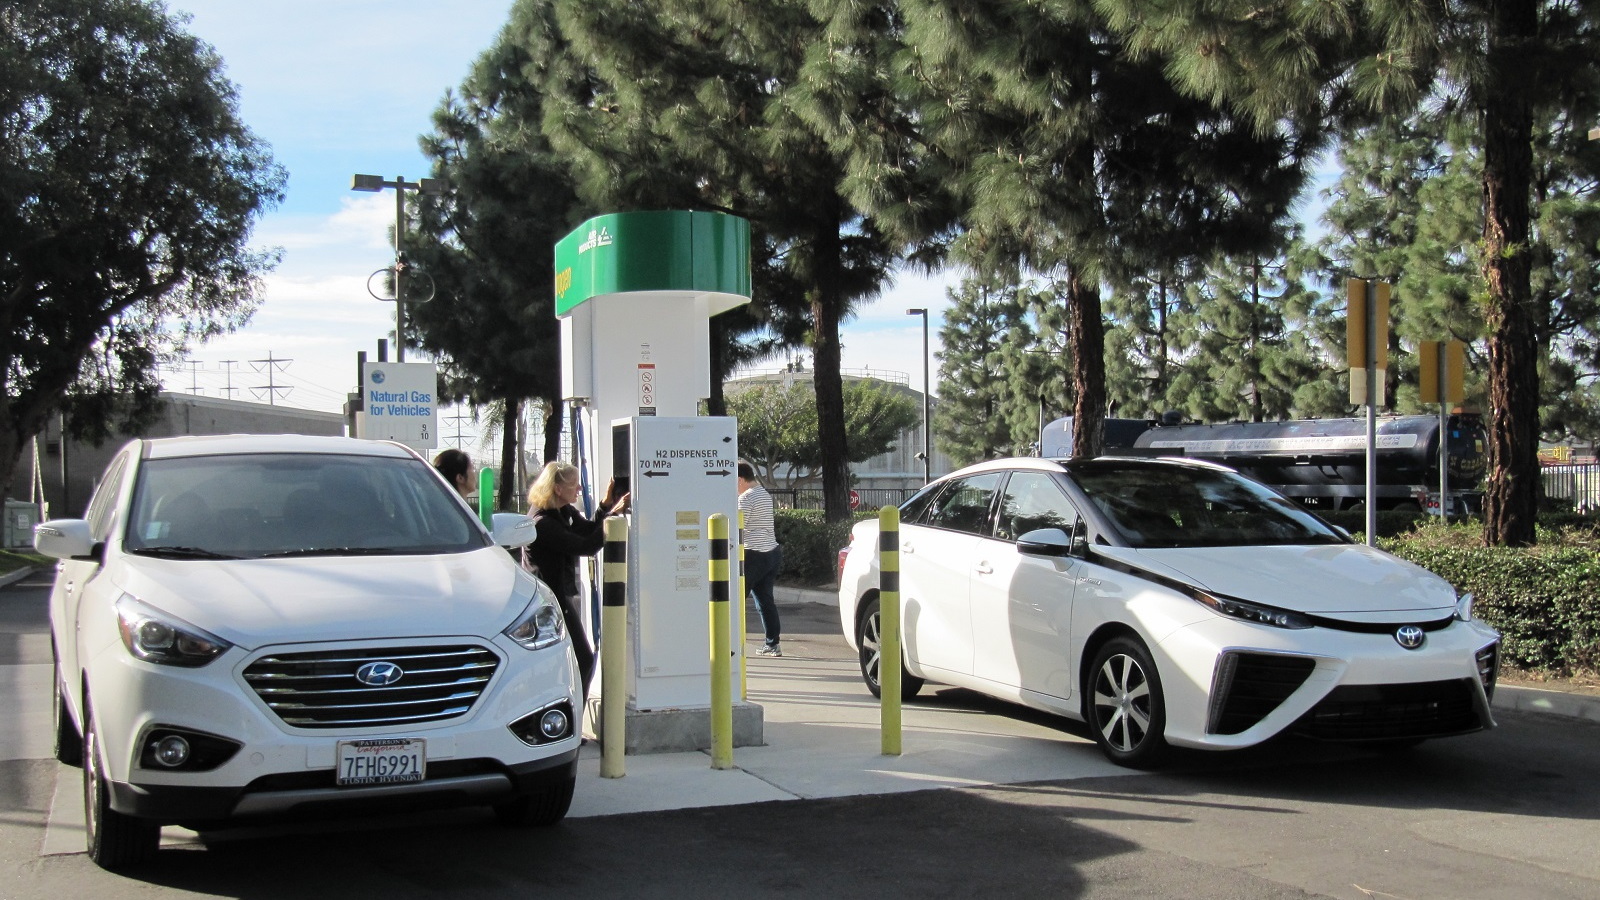 2015 Hyundai Tucson Fuel Cell, 2016 Toyota Mirai at hydrogen fueling station, Fountain Valley, CA